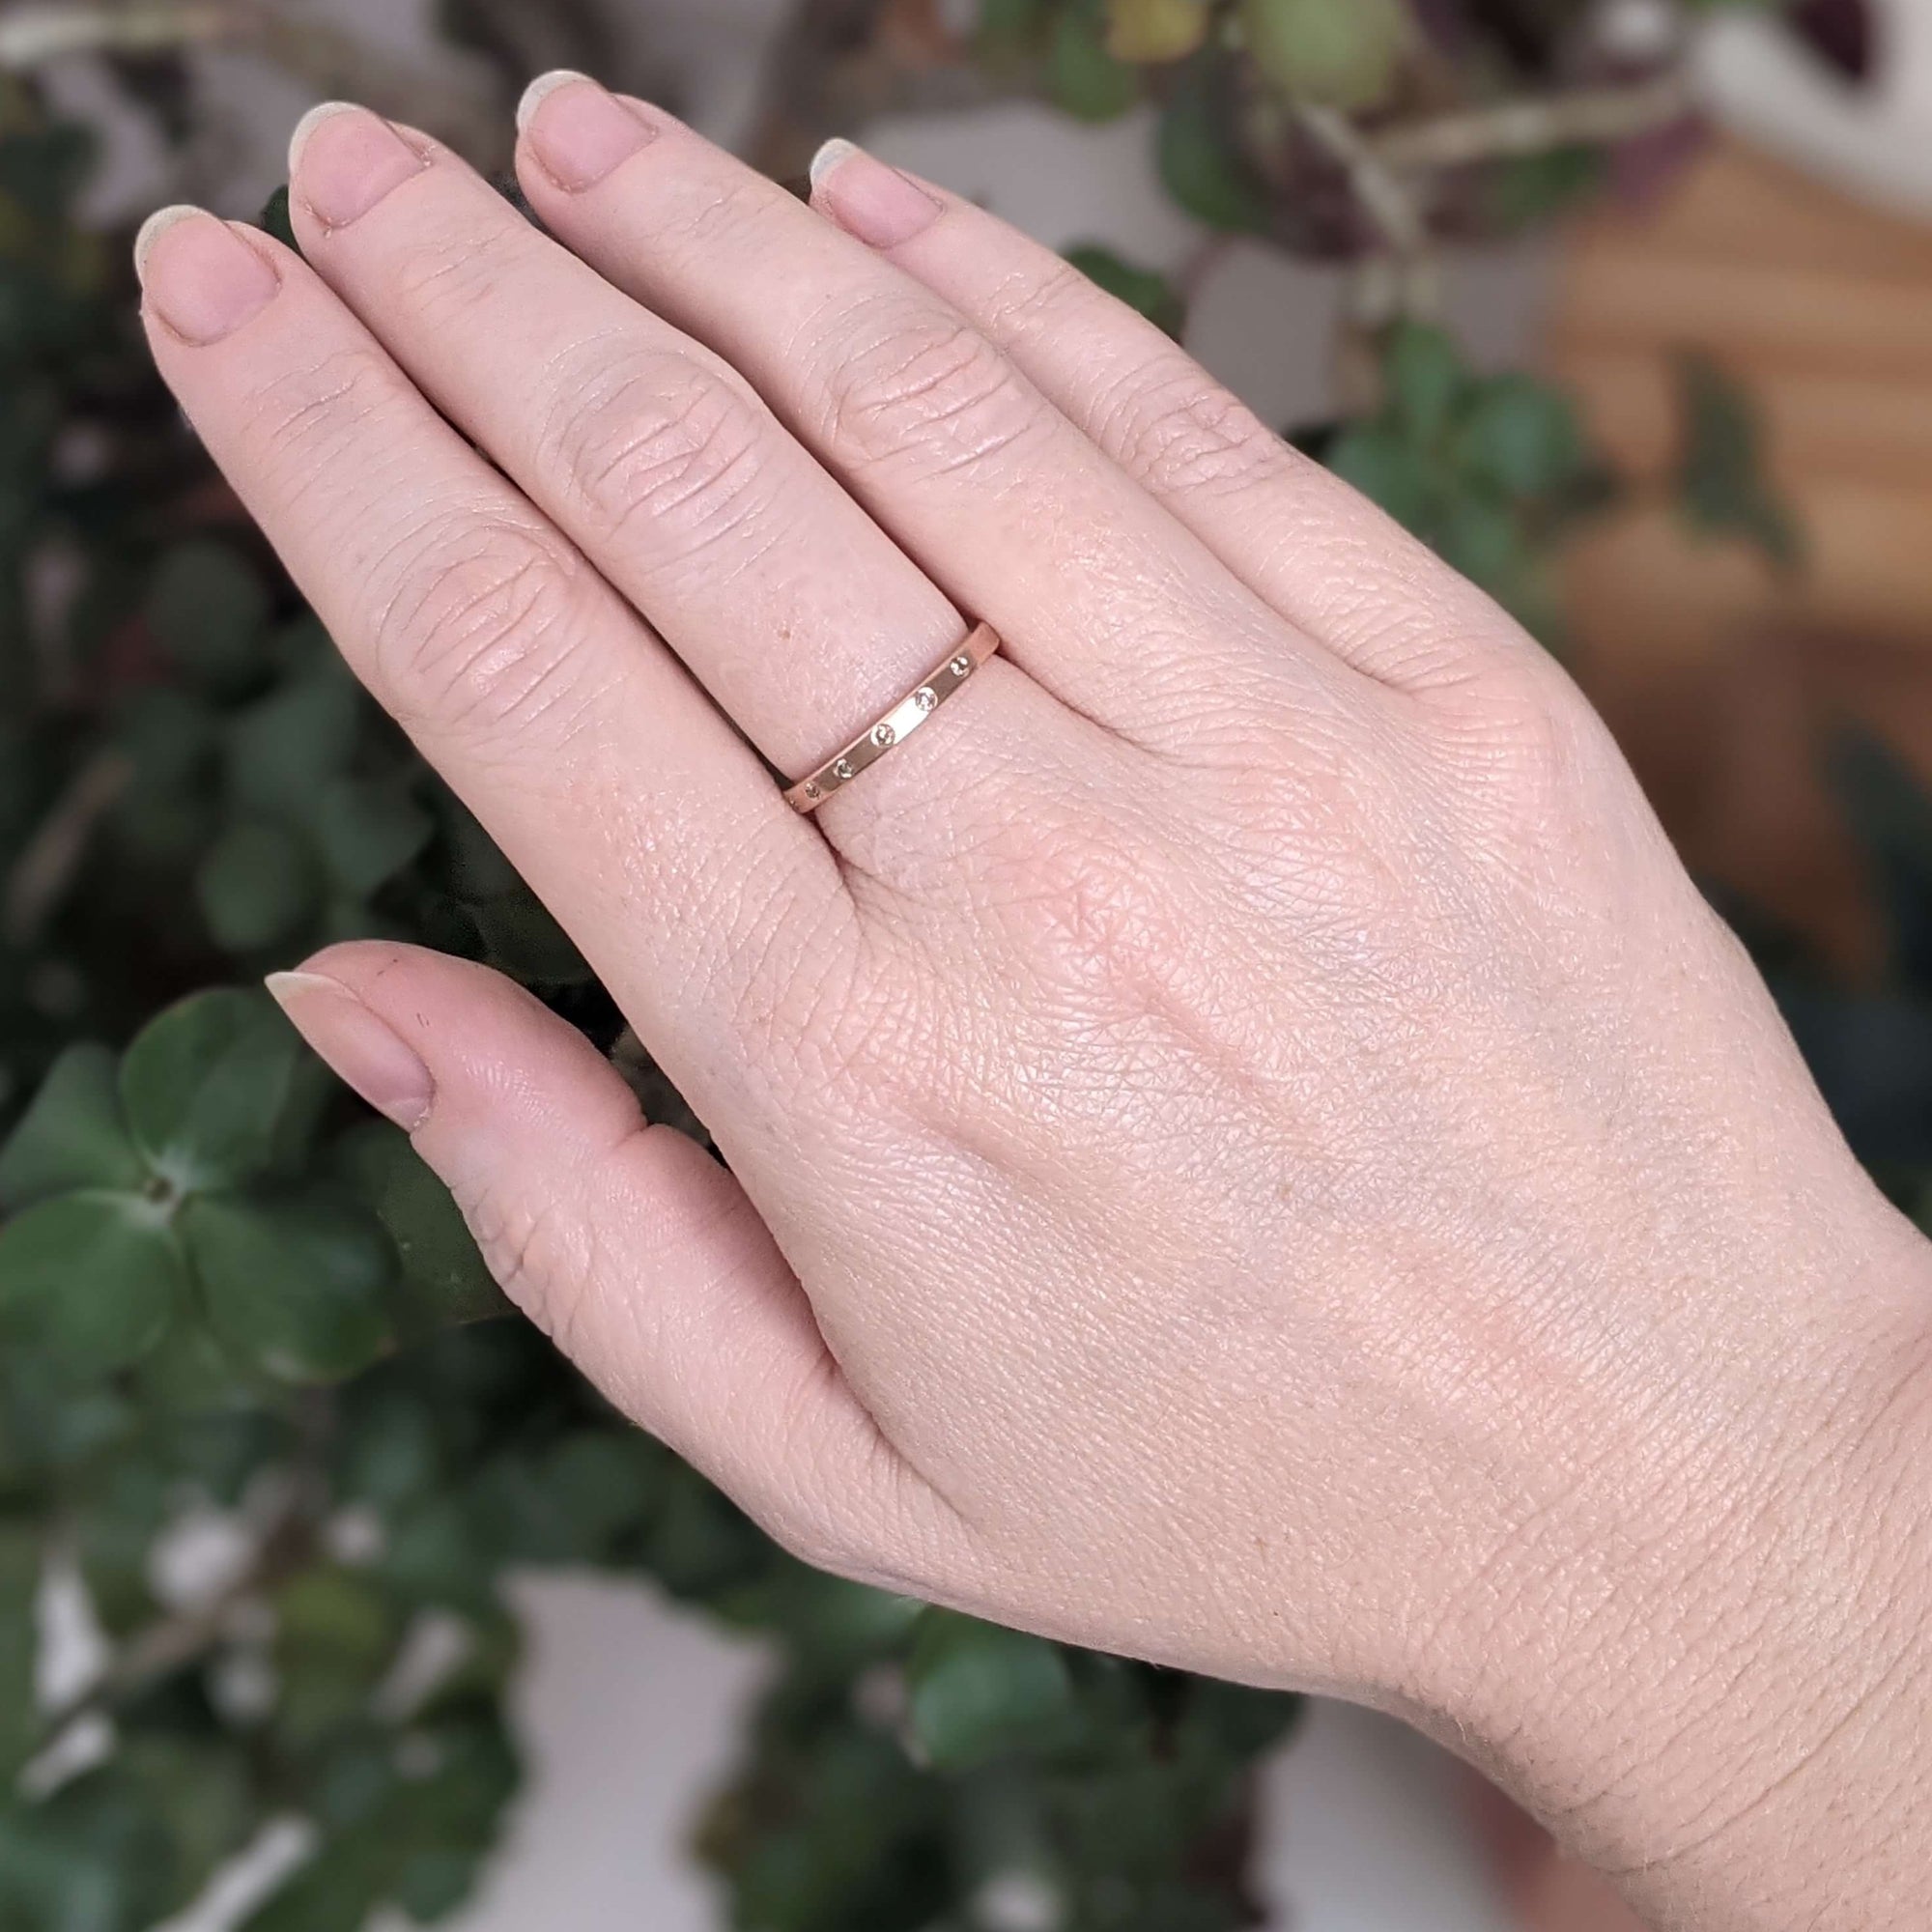 Rose gold and champagne diamond eternity band. Handmade by EC Design Jewelry in Minneapolis, MN using recycled metal and conflict-free stones.